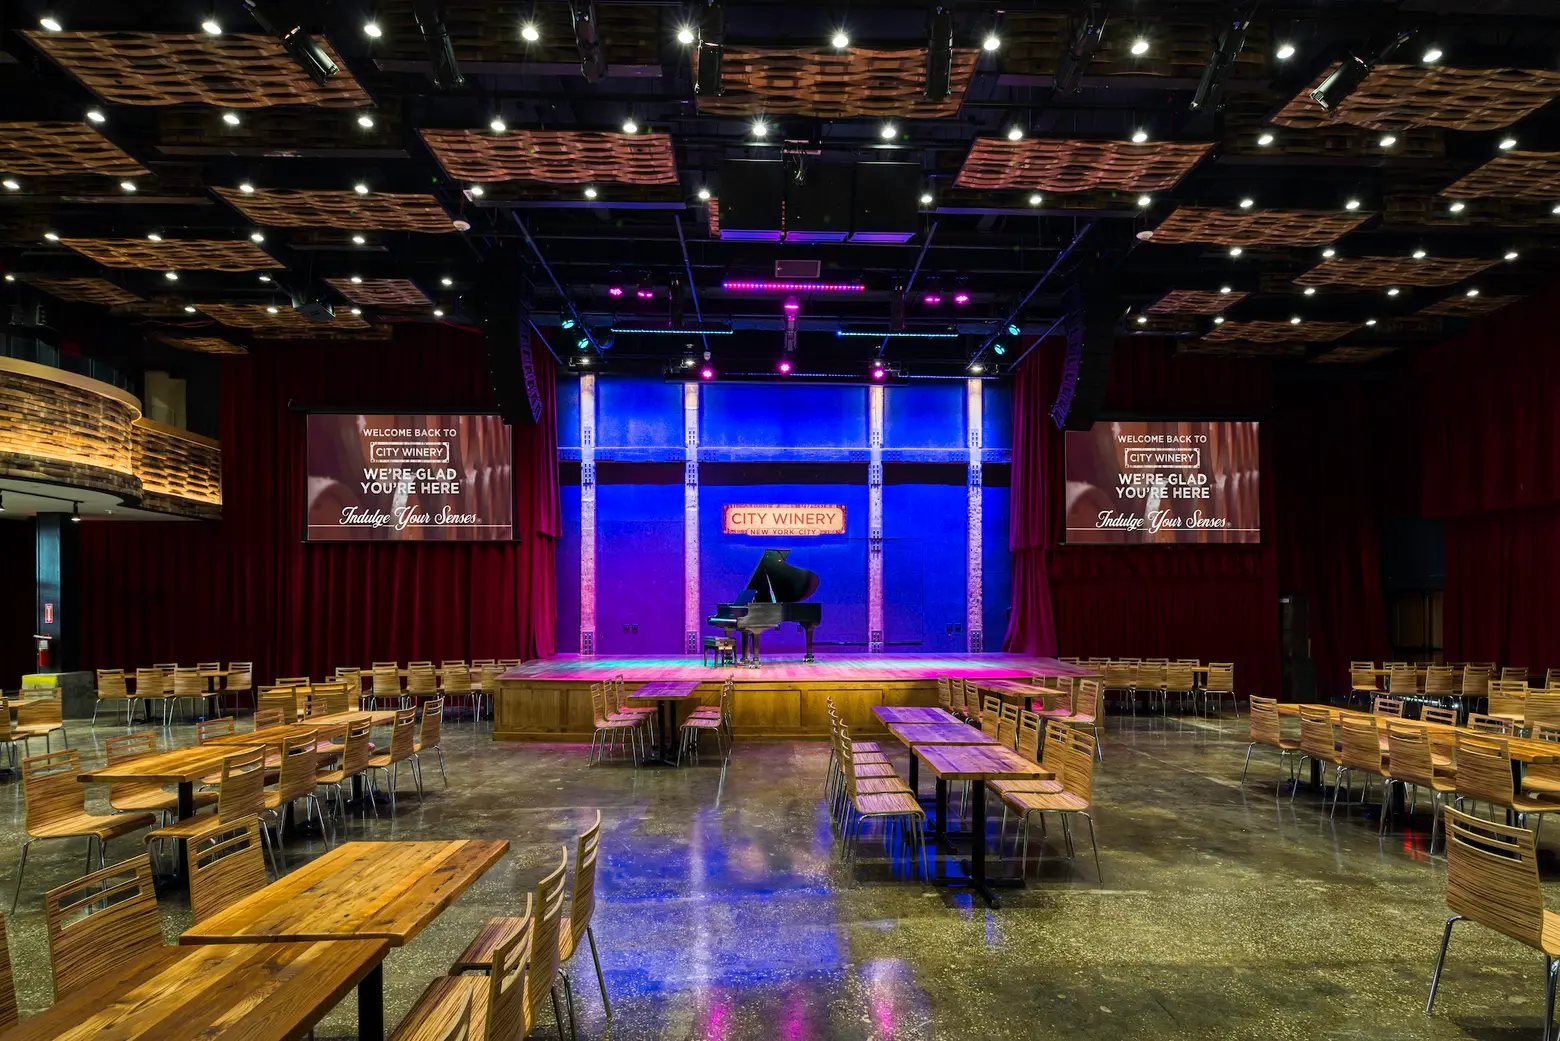 Indoor dining at City Winery will require $50 on-site COVID test